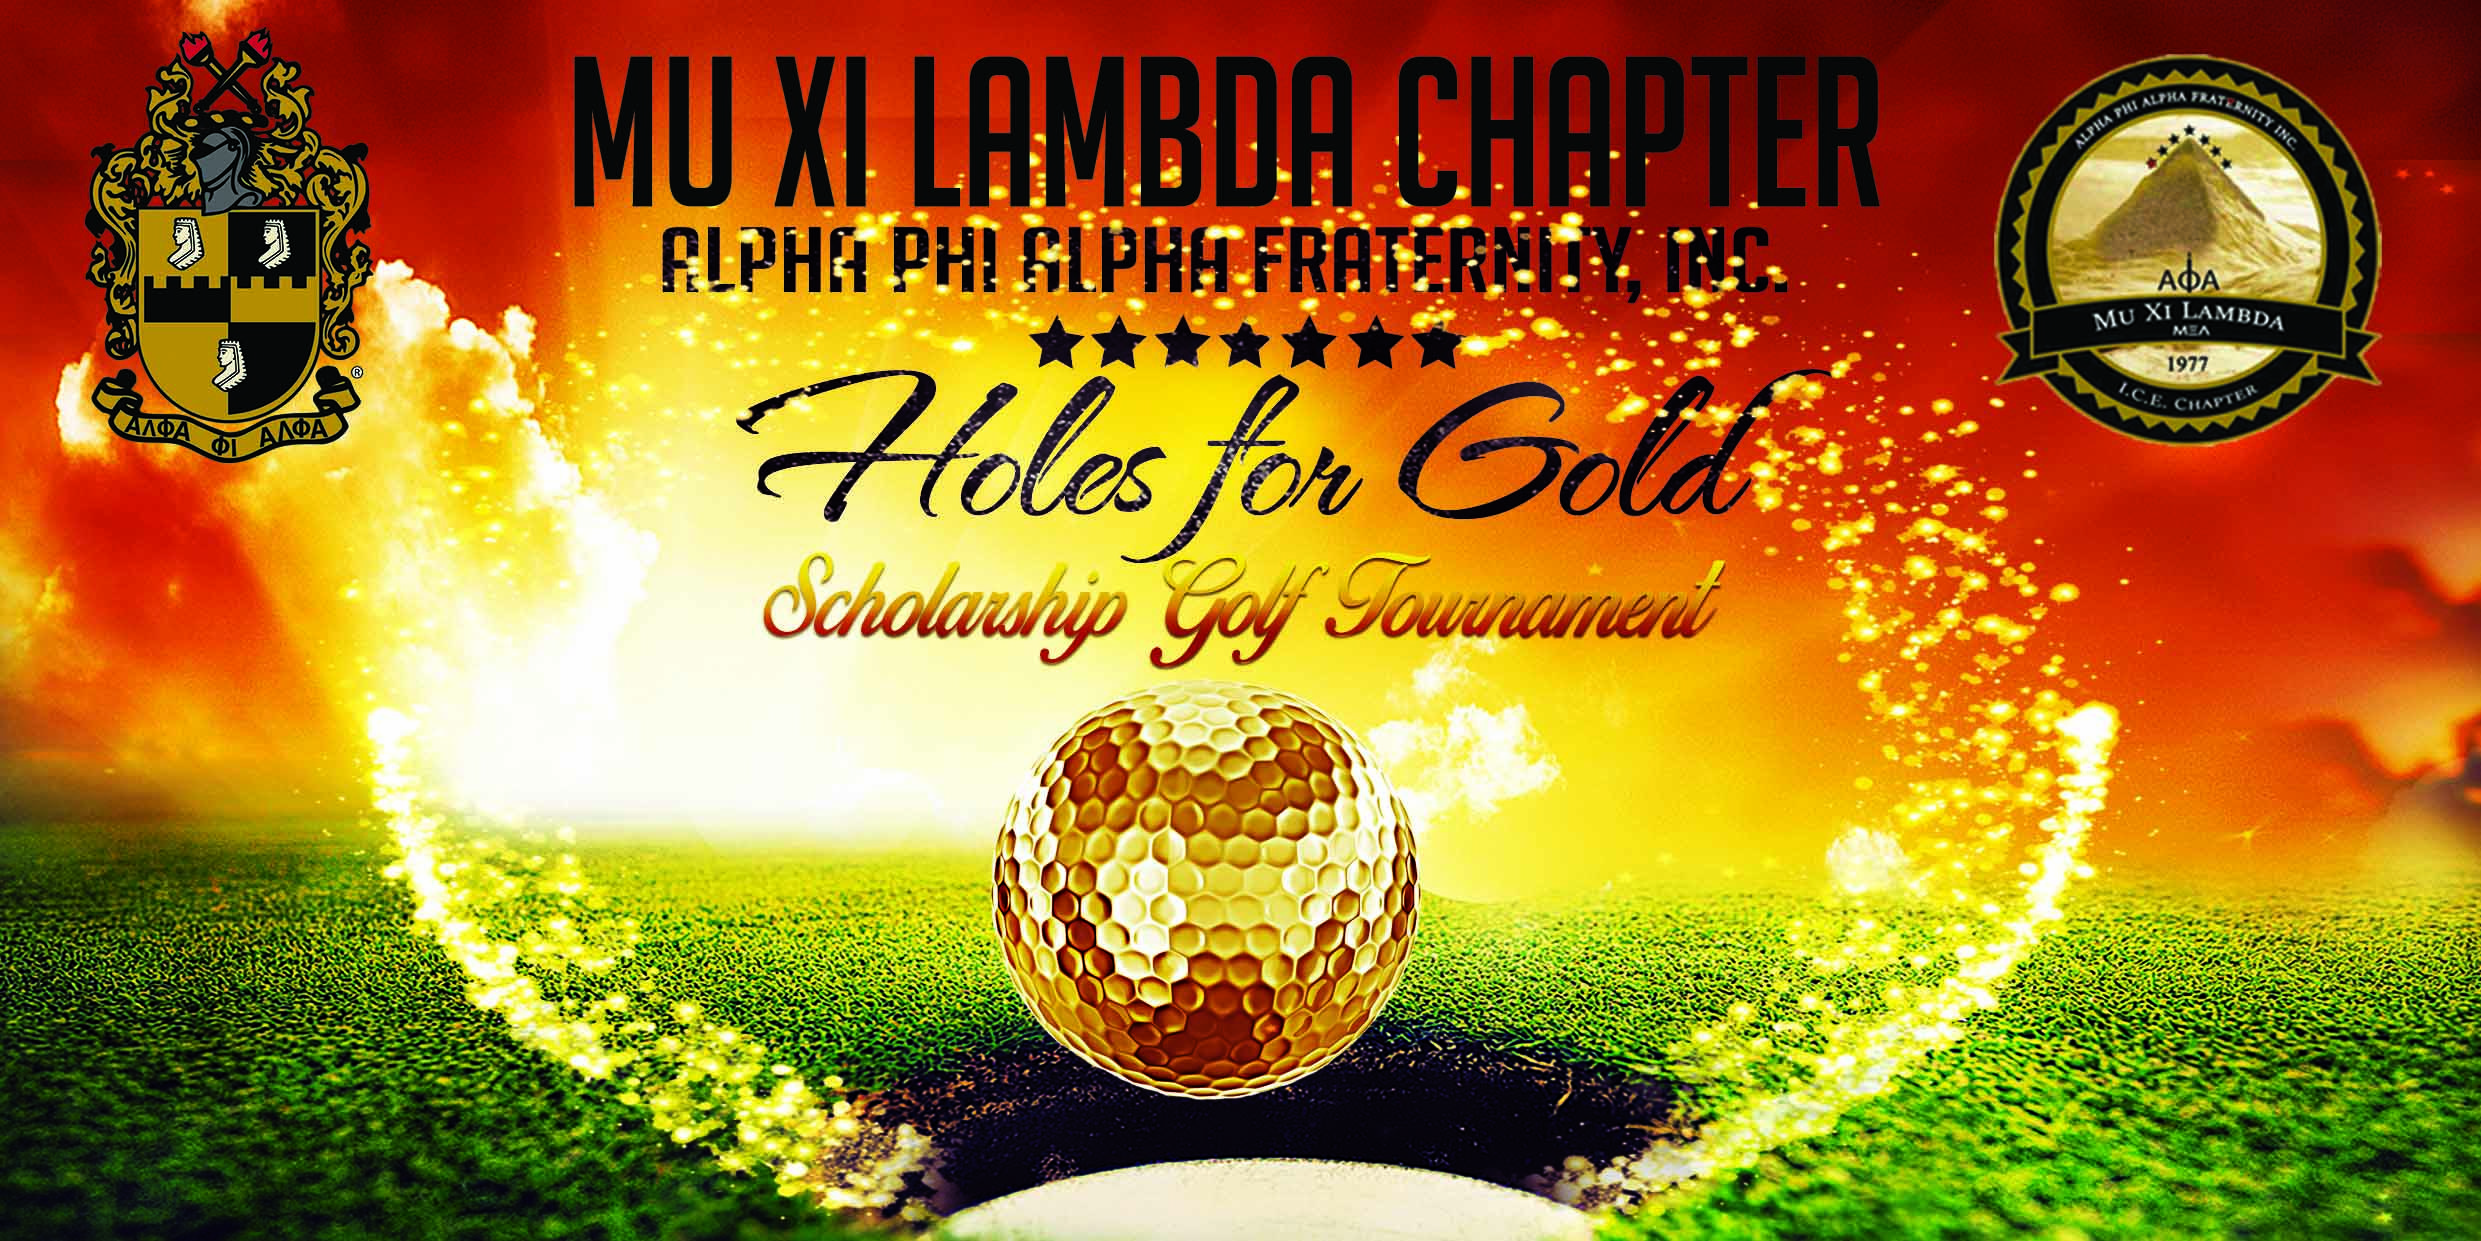 Holes for Gold - Inagural Golf Tournament